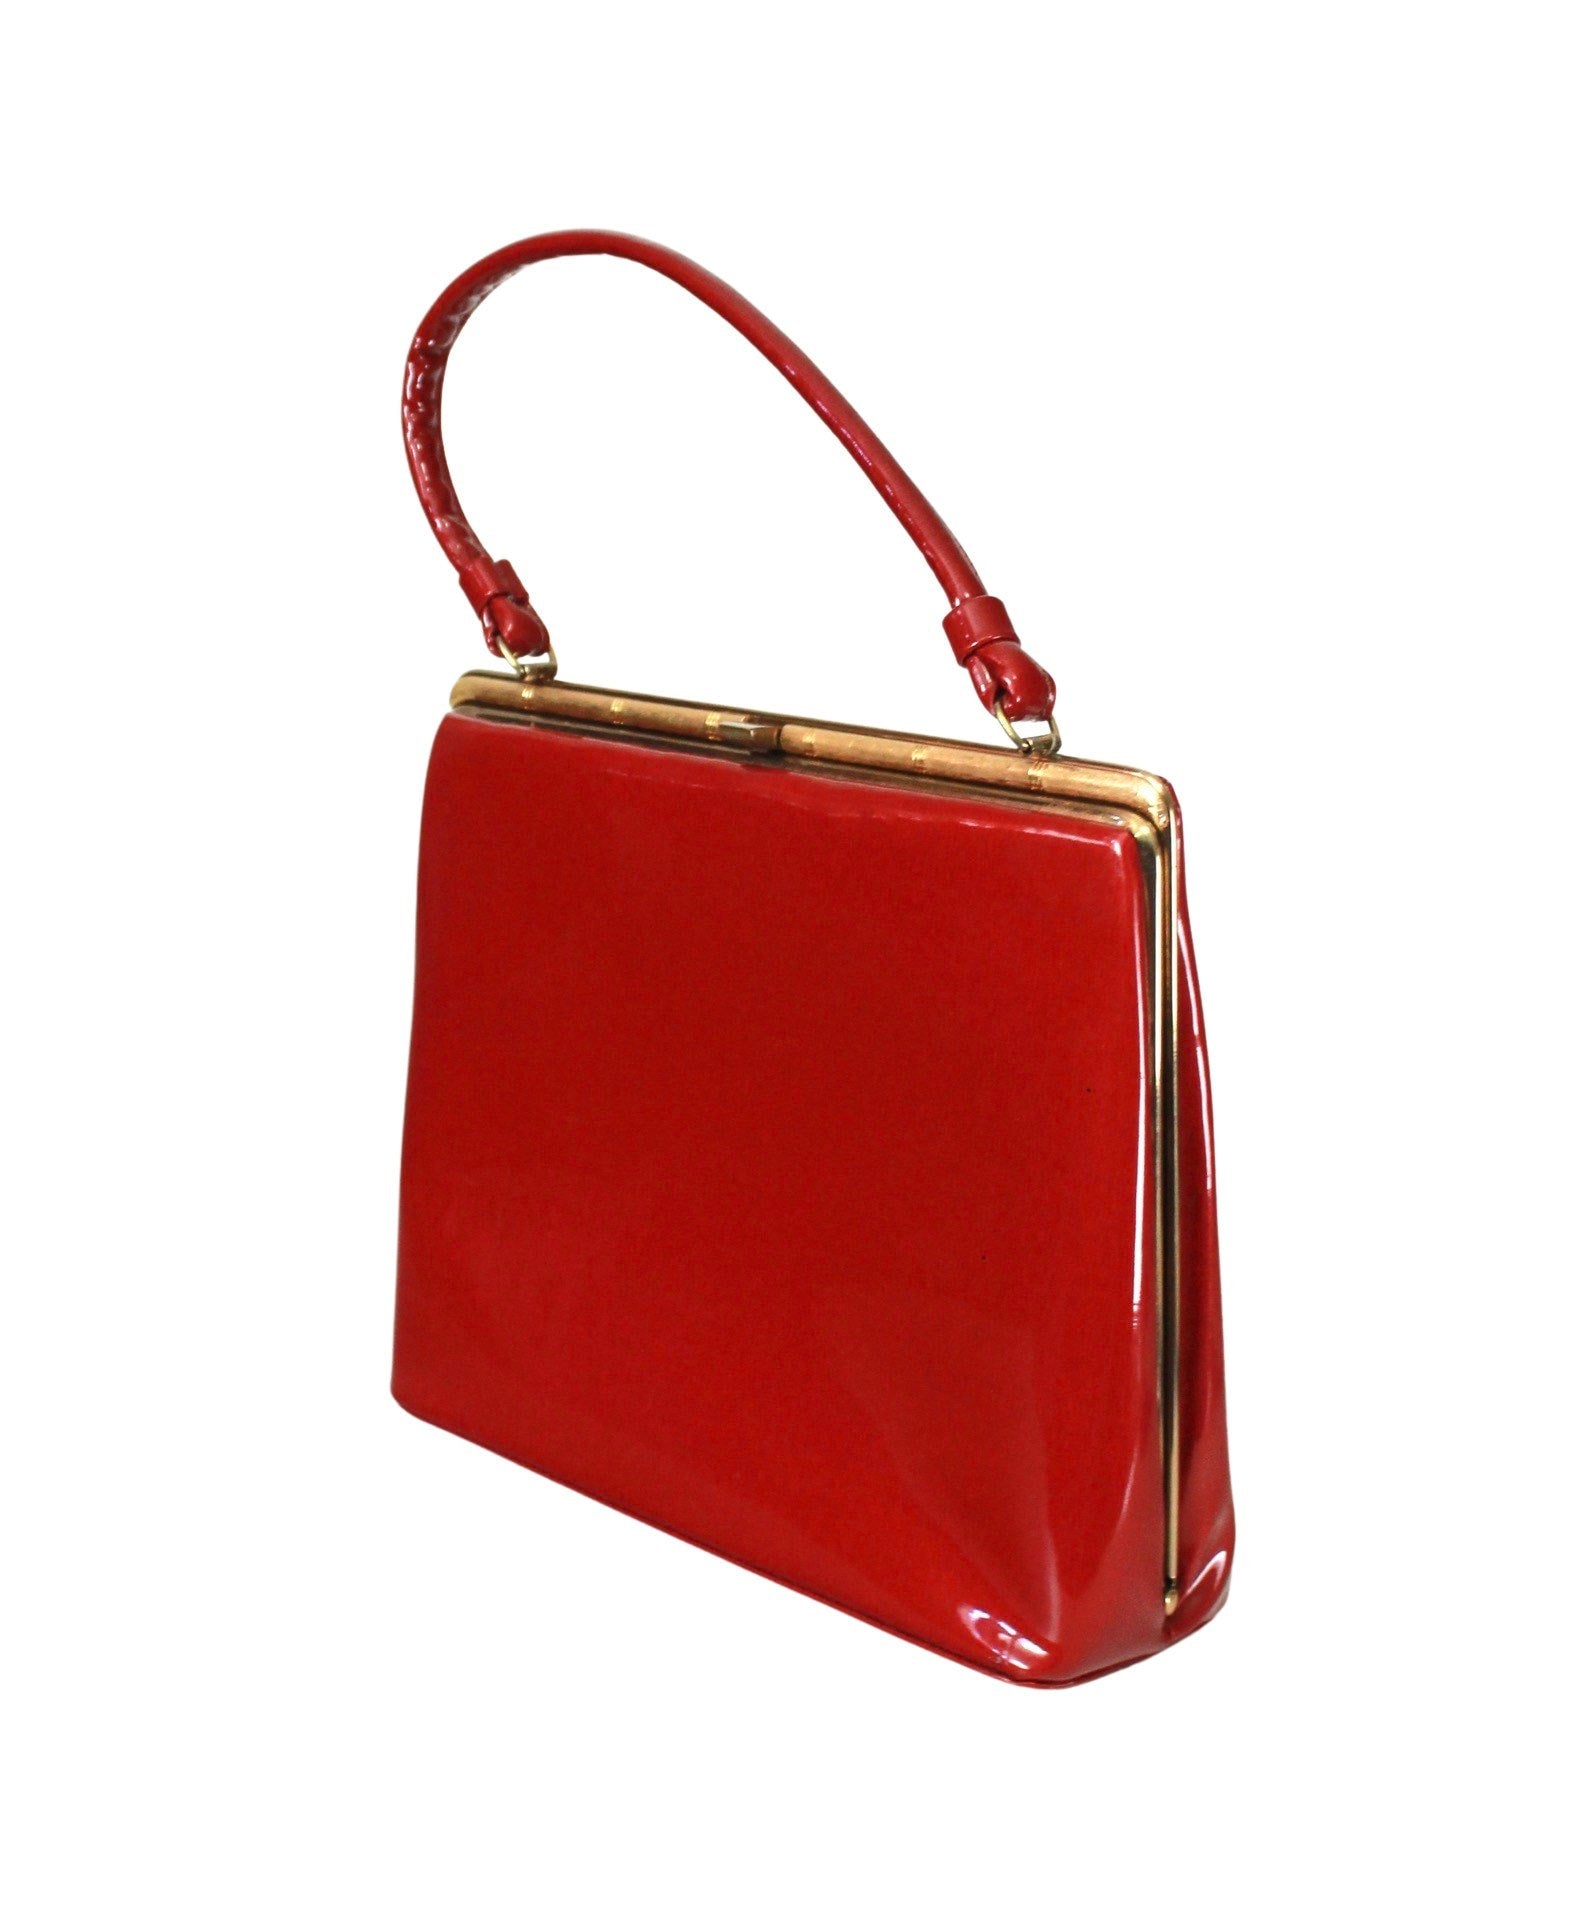 Vintage 50s Candy Apple Red Patent Leather Kelly Handbag